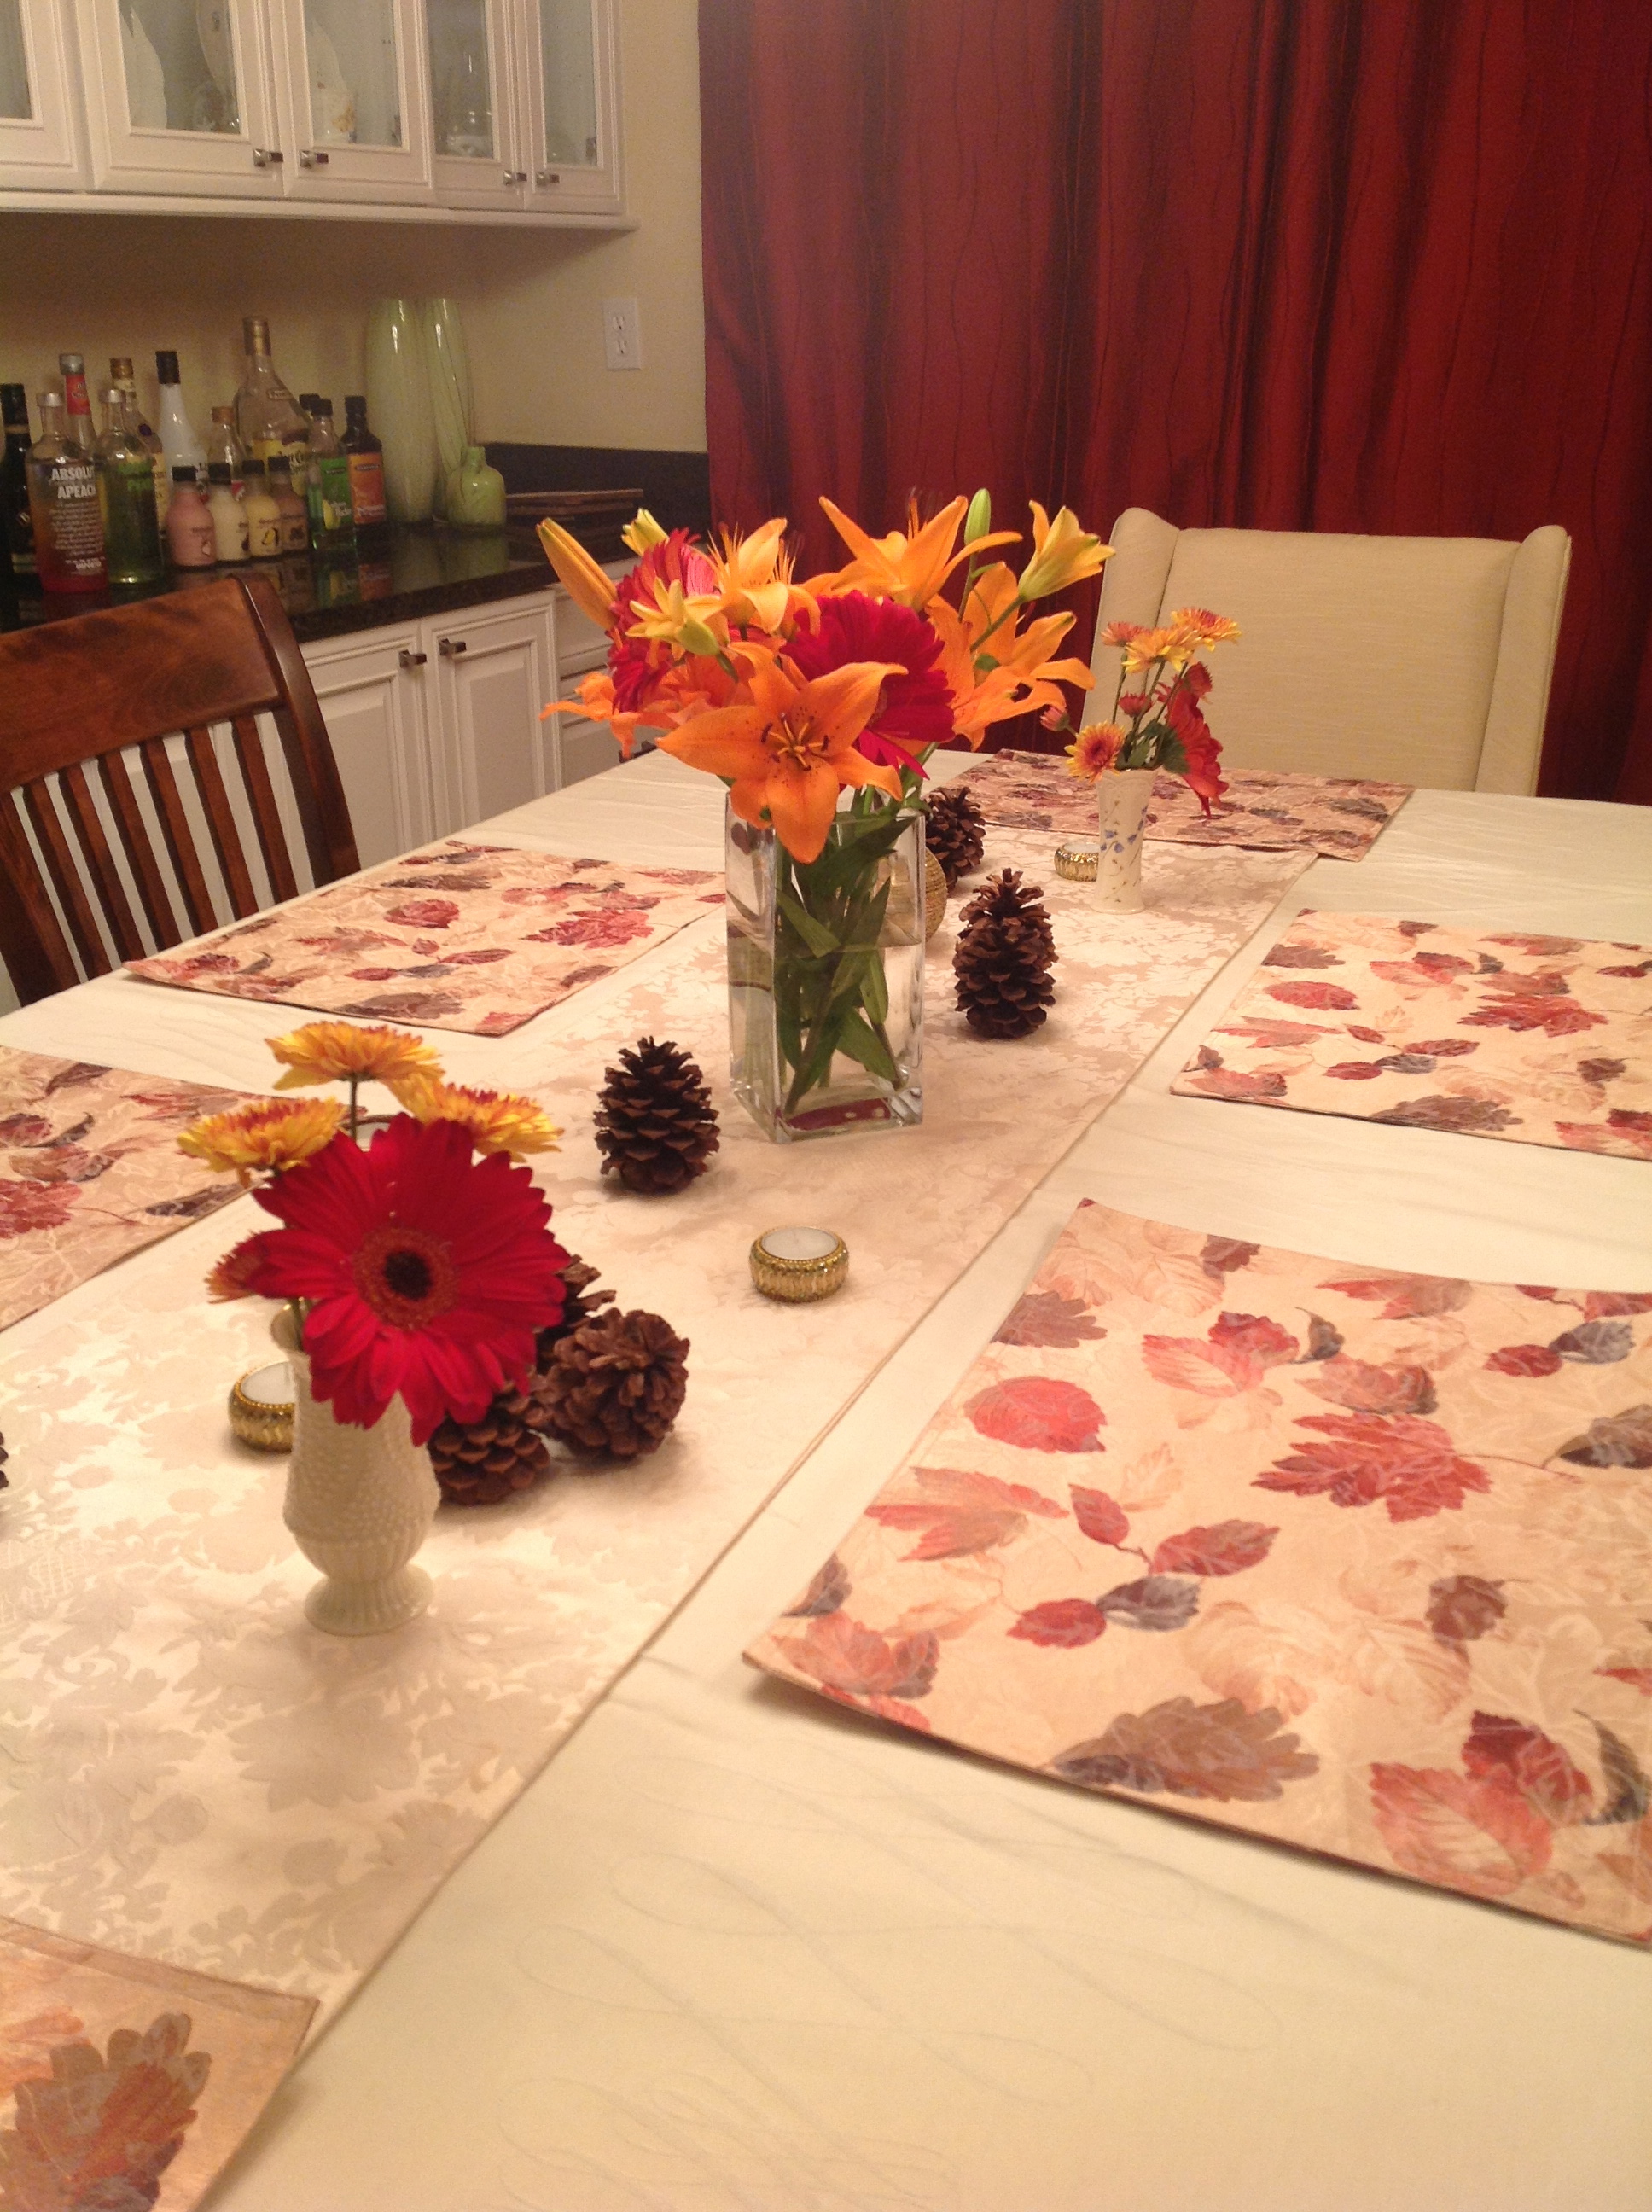 my simple table setting!